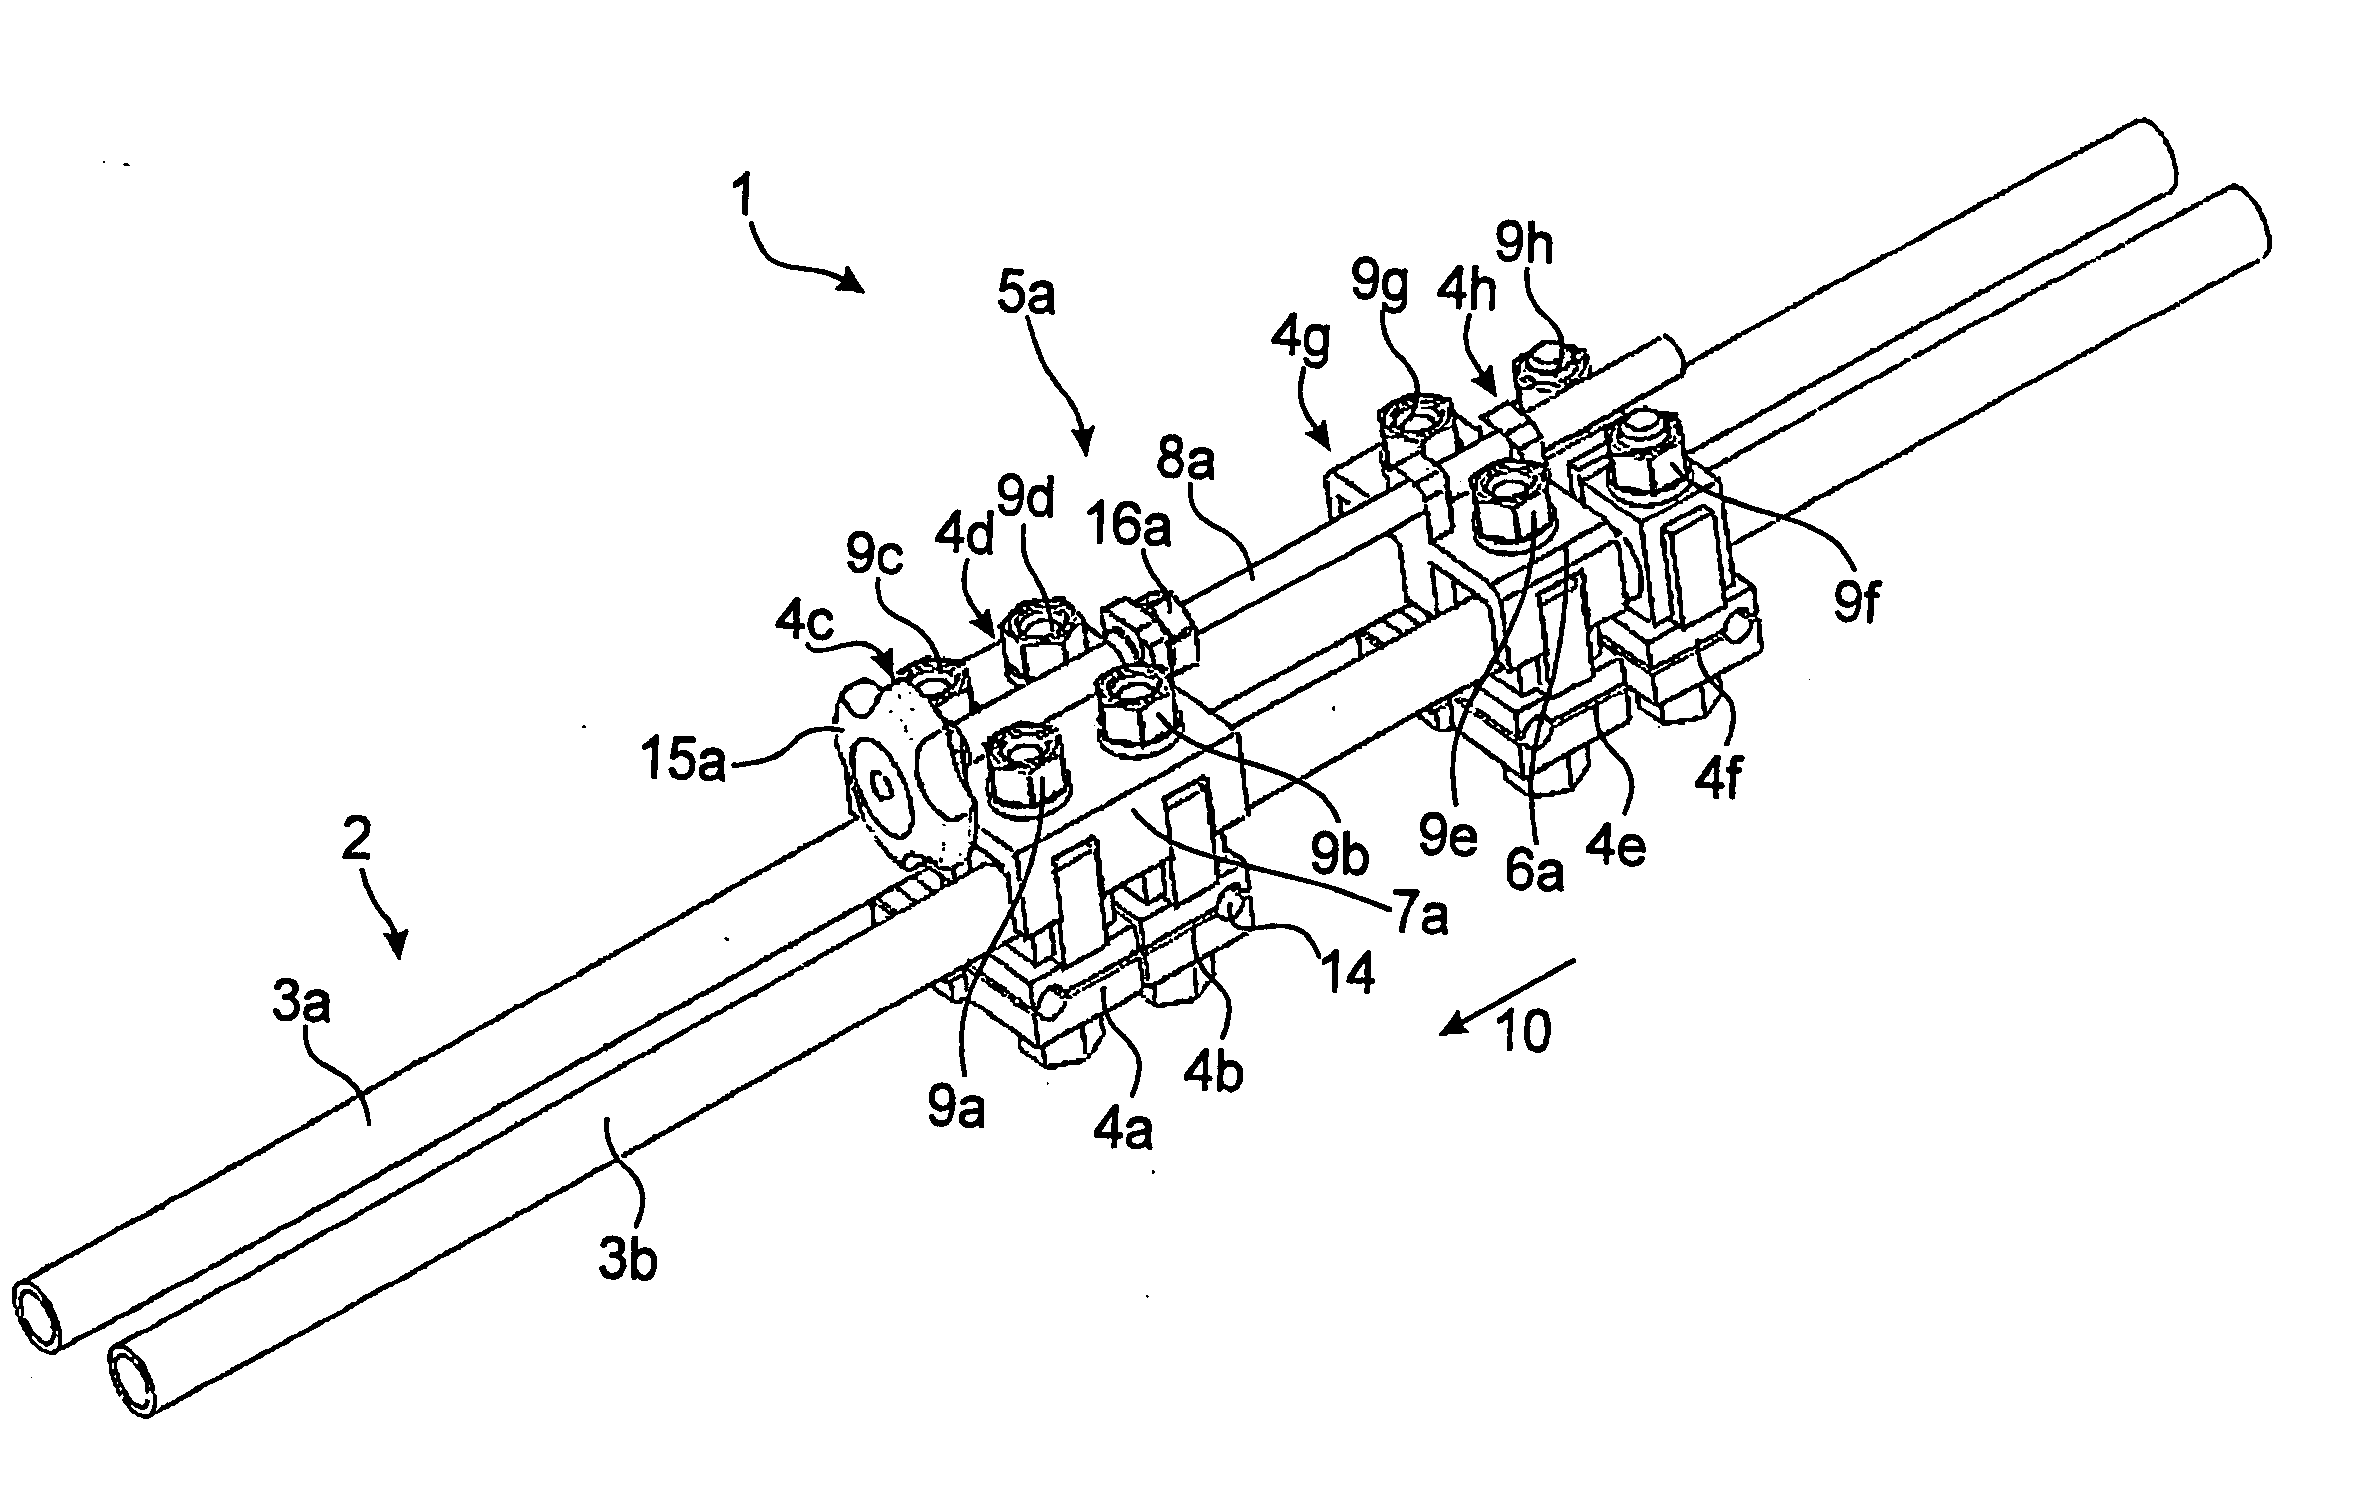 External fixation device for osteosynthesis